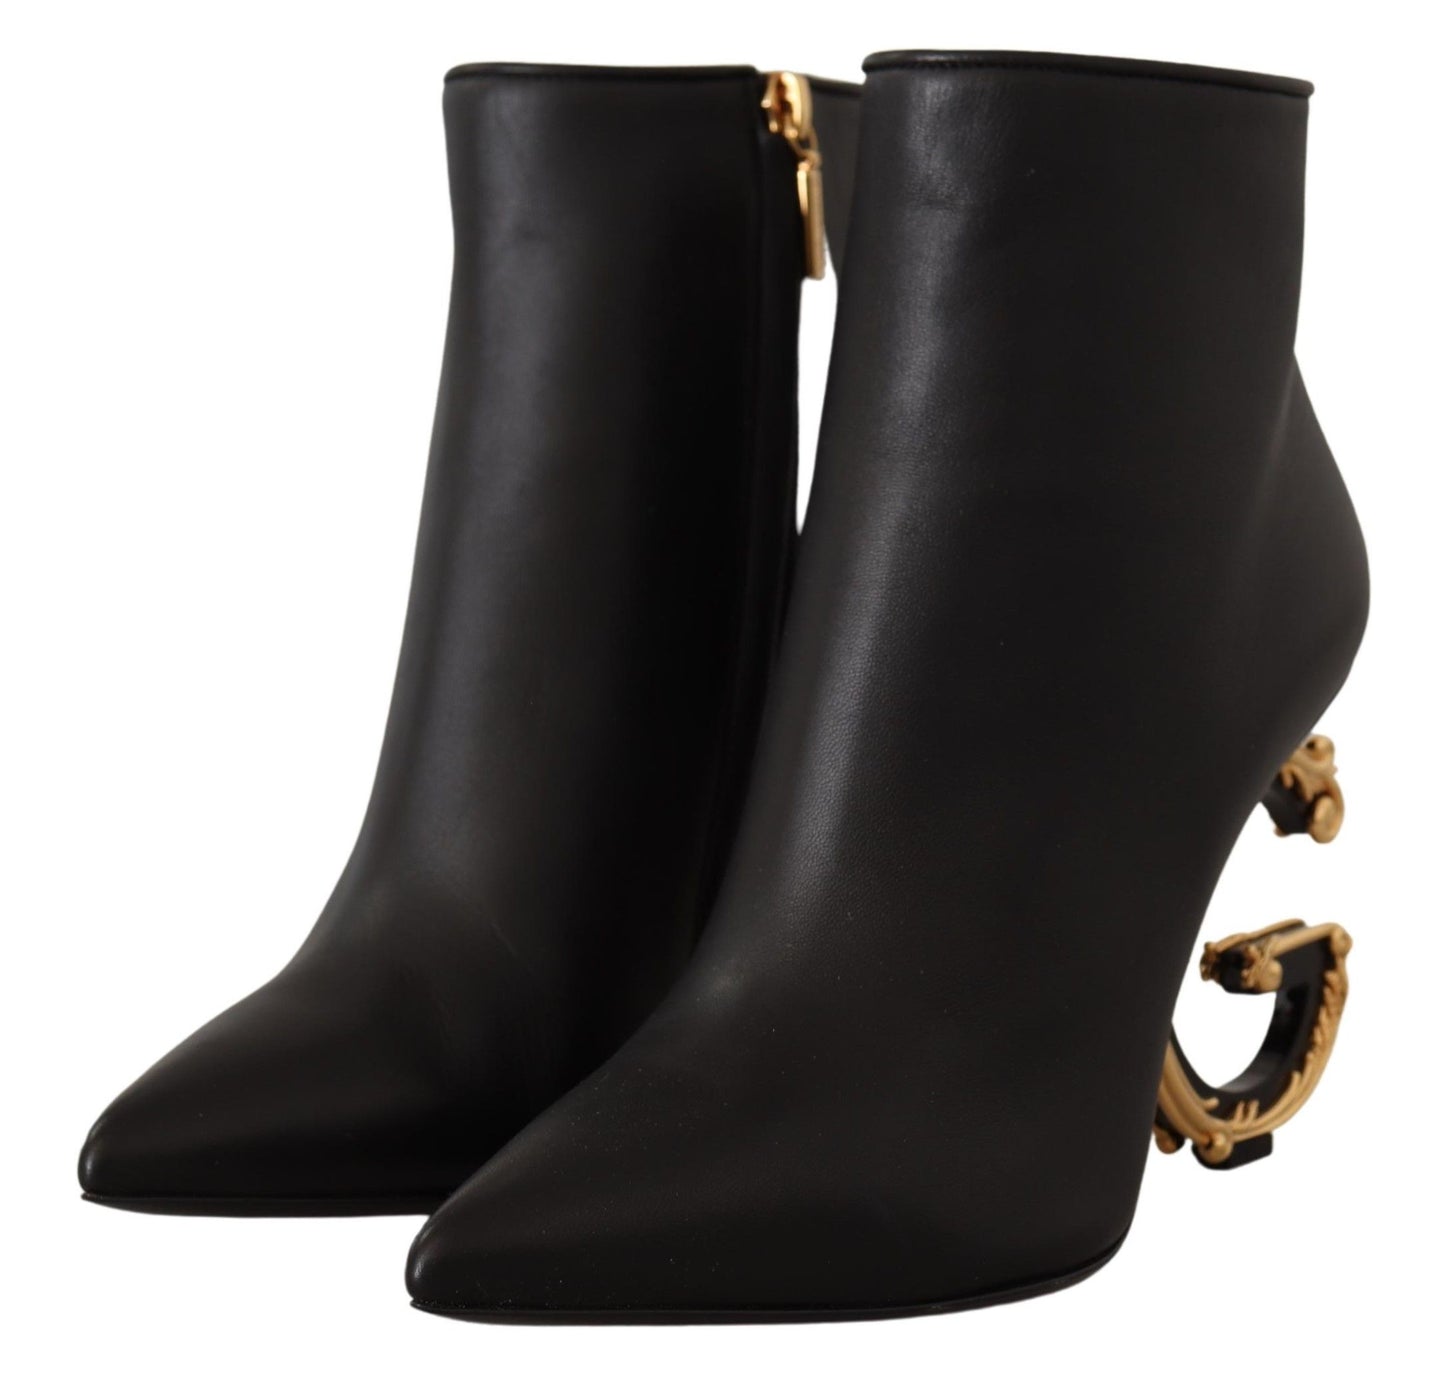 Elegant Black Leather Ankle Boots with Gold Detailing